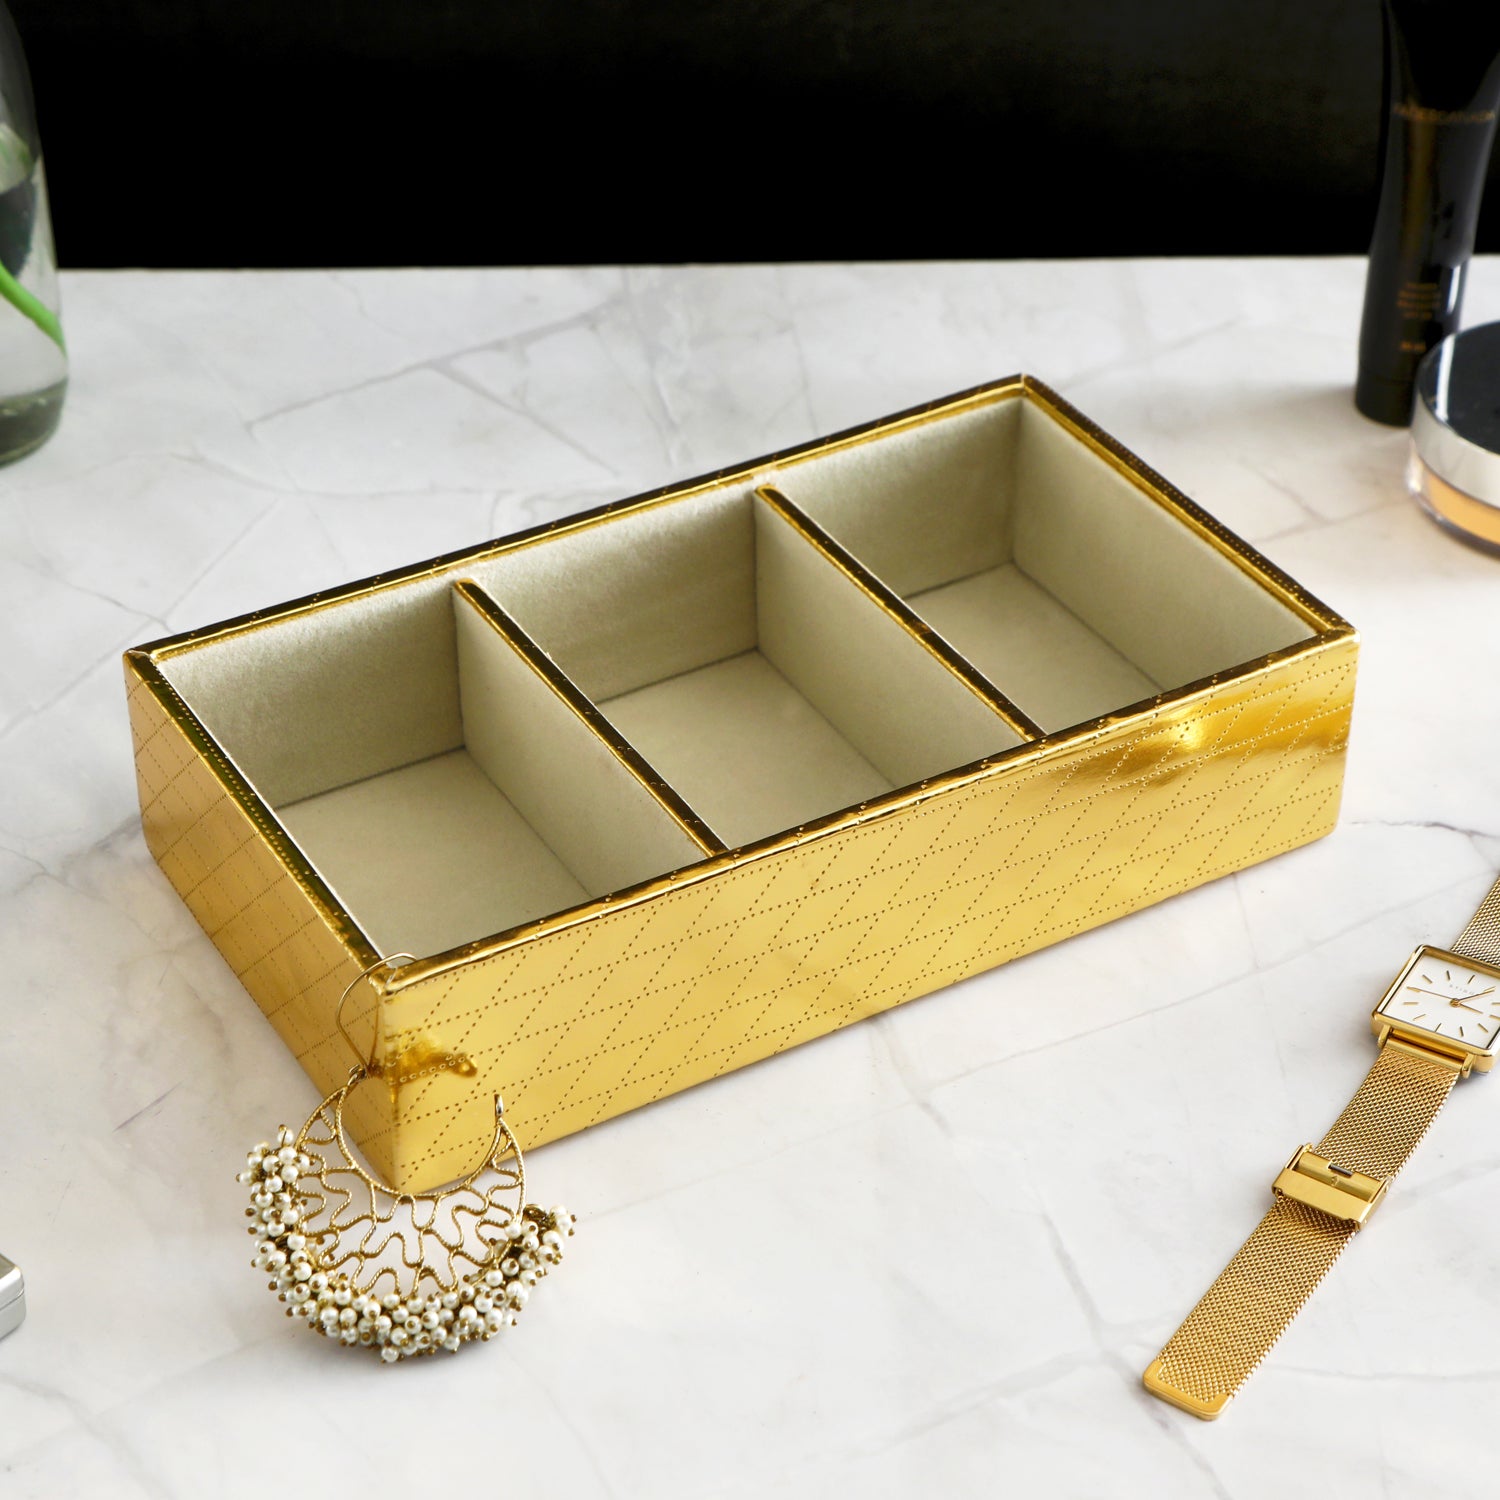 Jewellery Tray 3 Partition - Gold Jewellery Organiser 1- The Home Co.